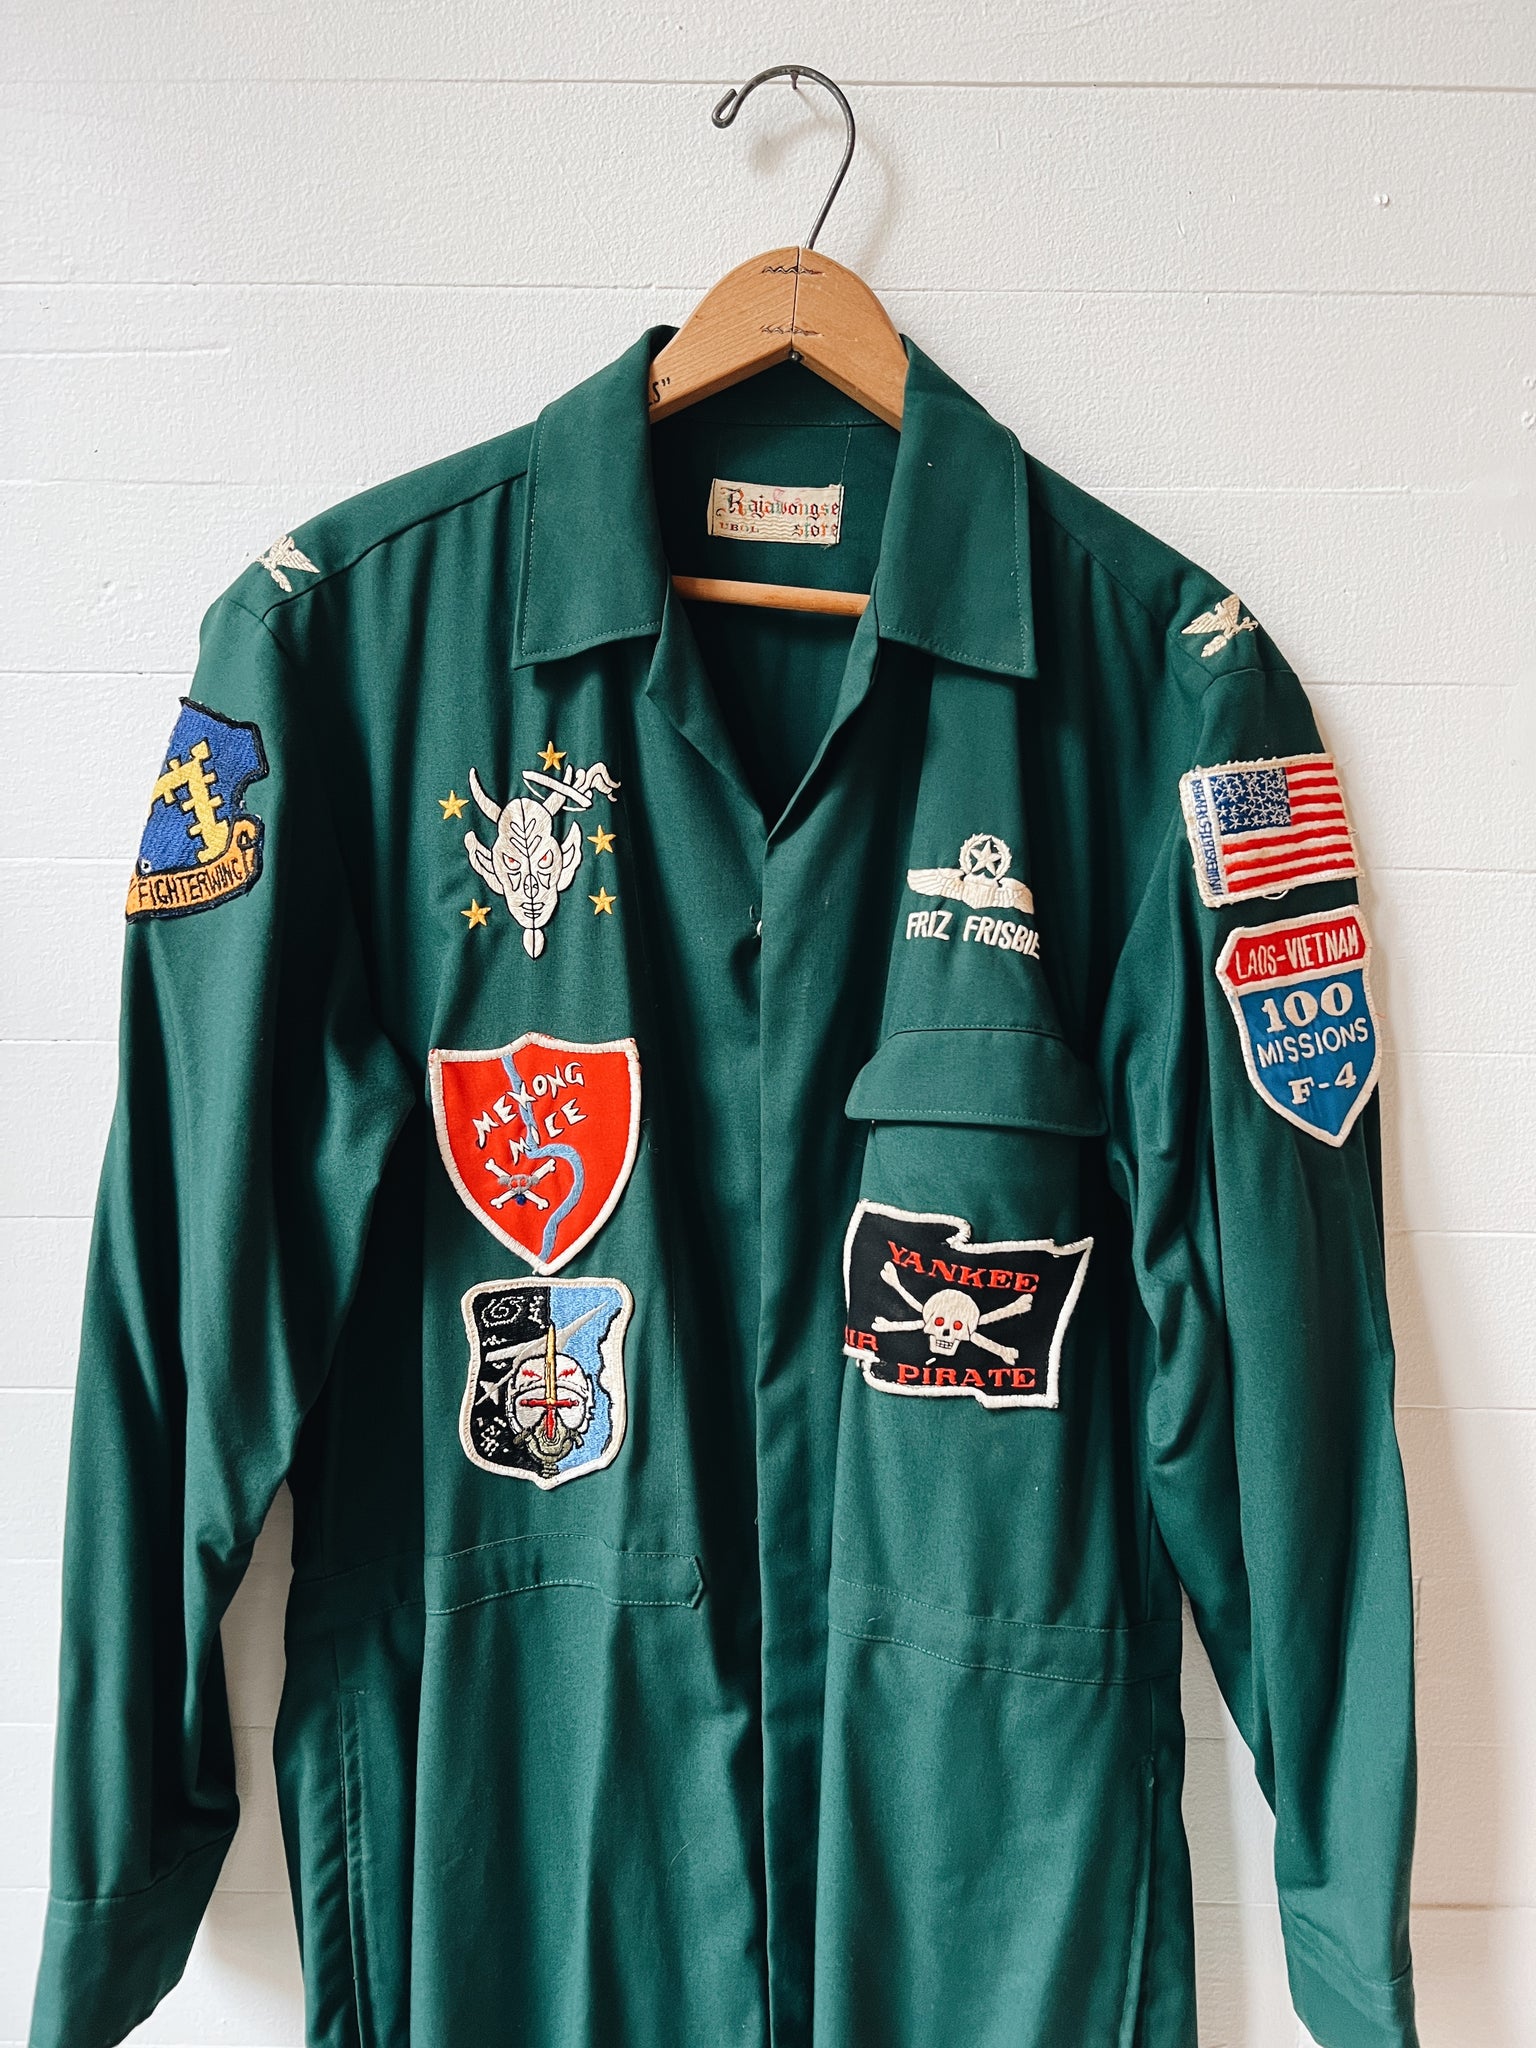 433rd tfs fighter pilot party suit - theater made with patches